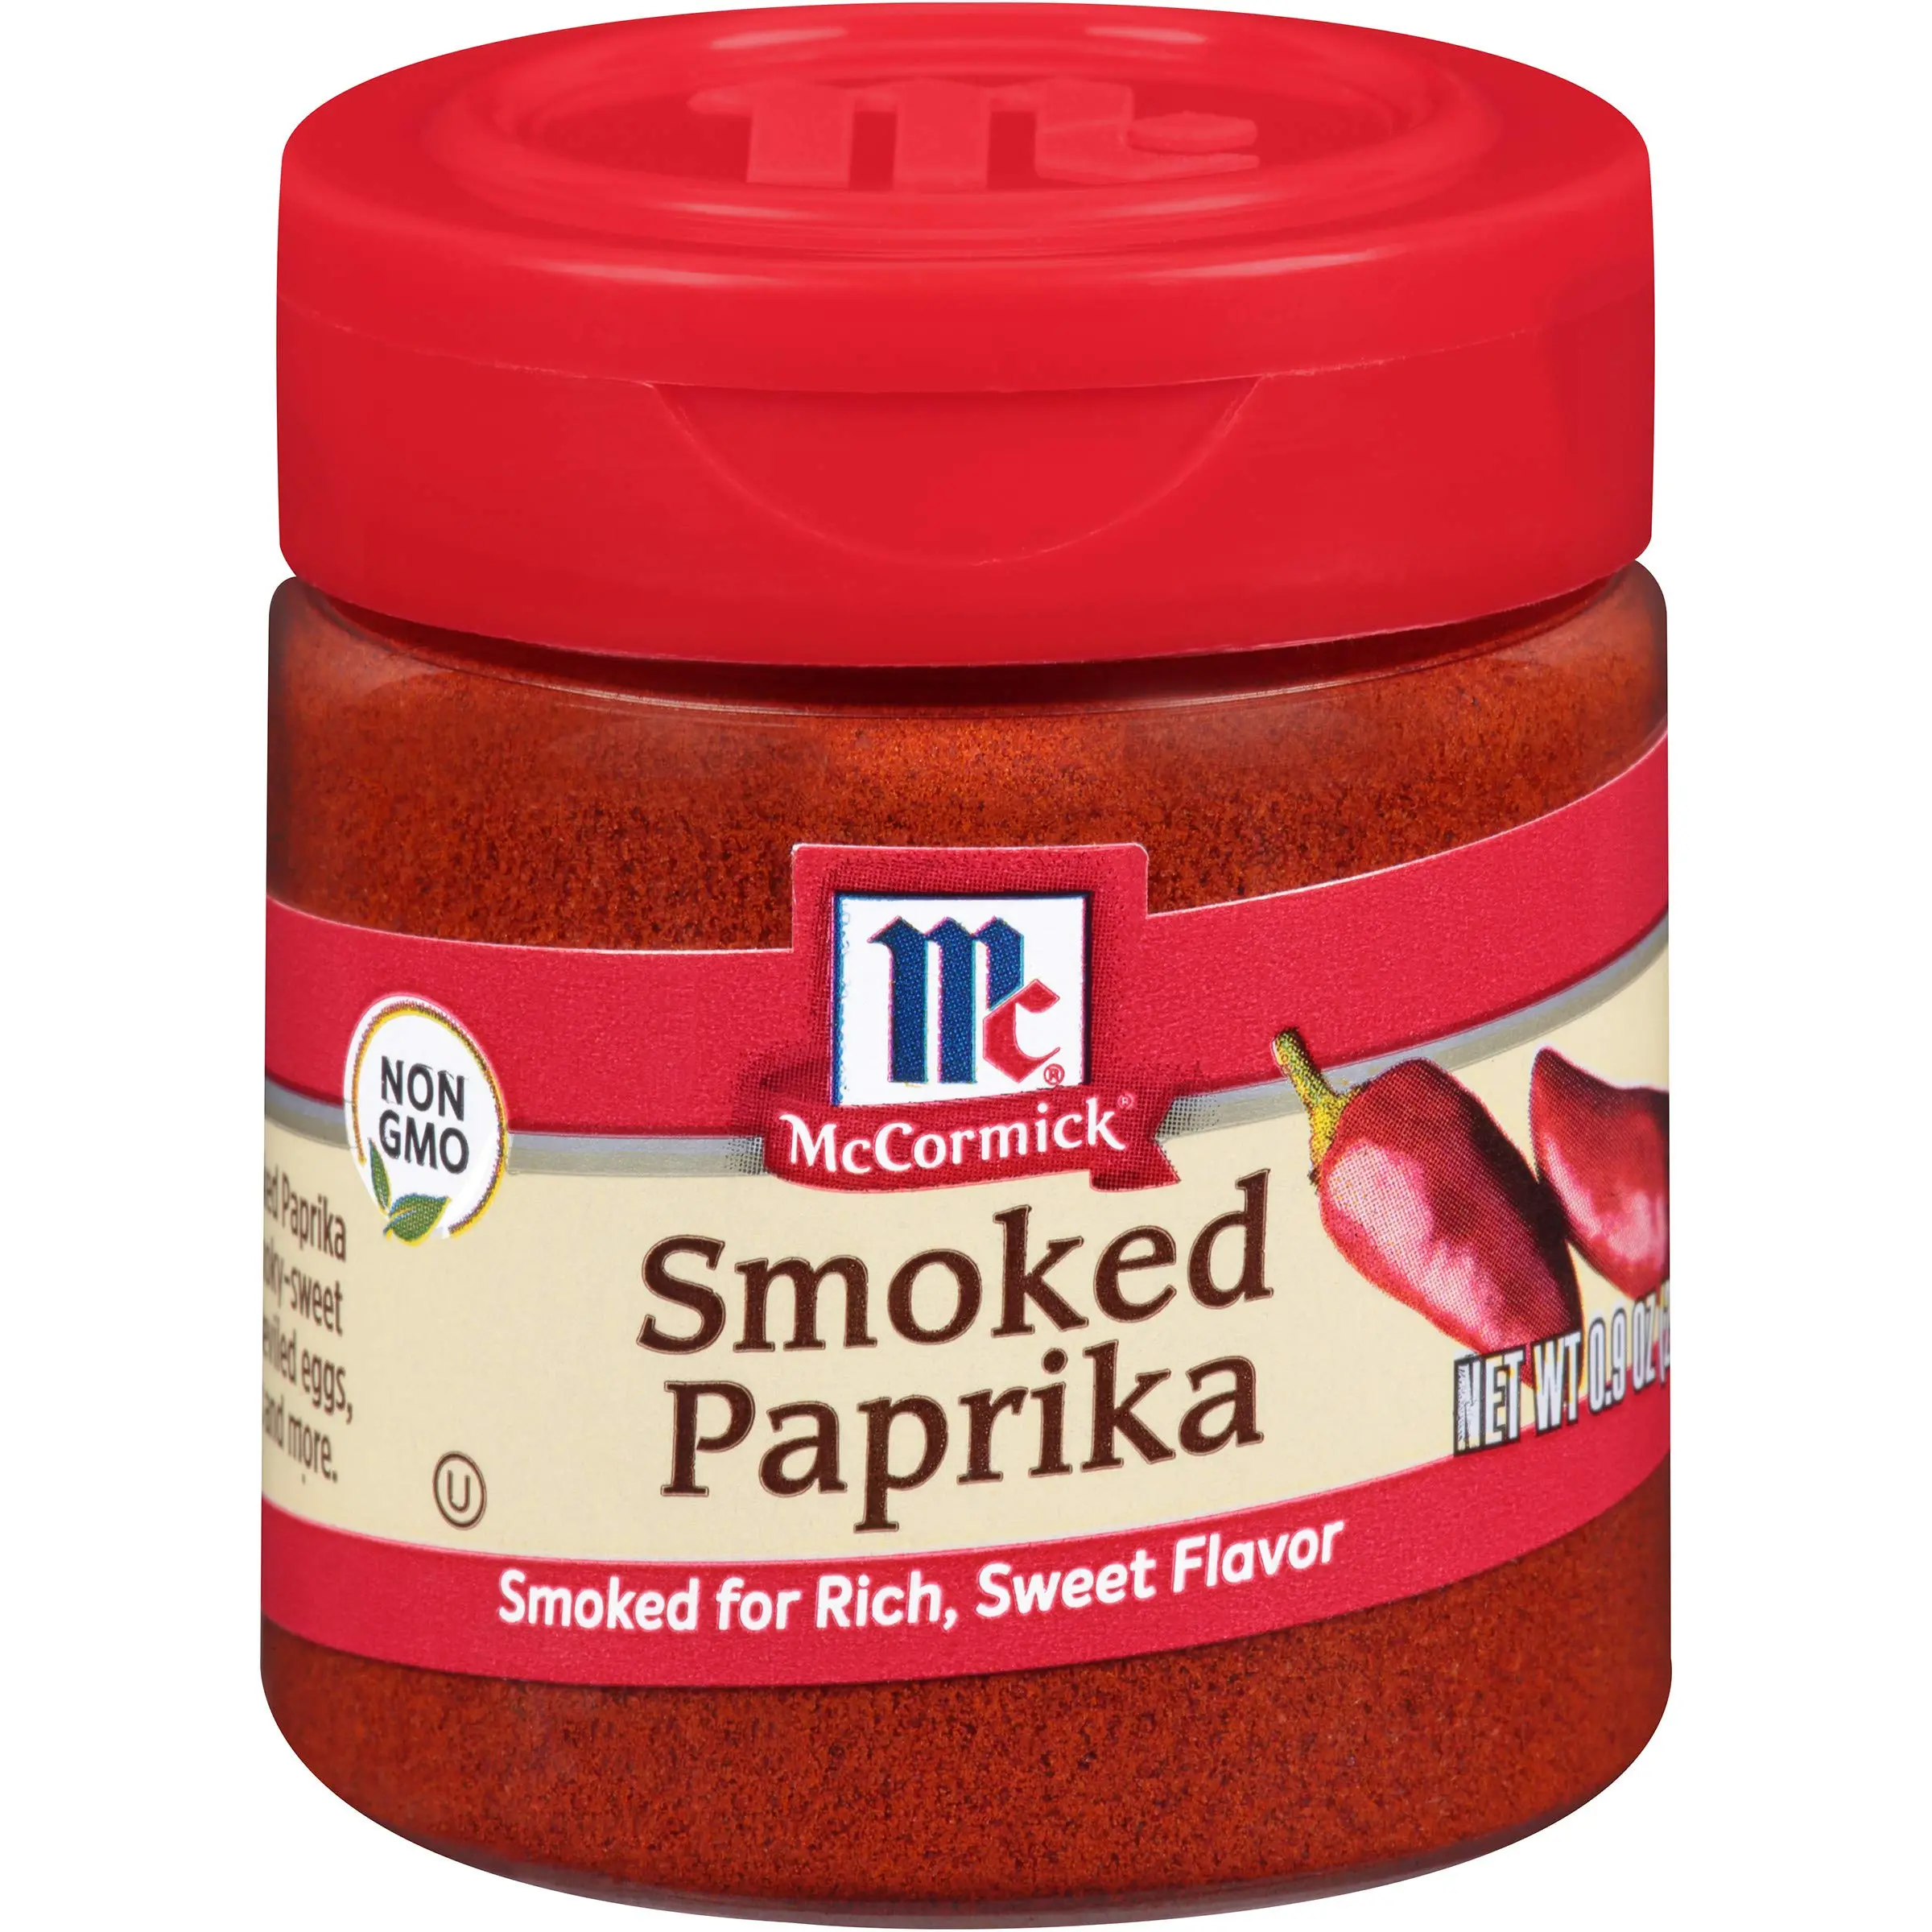 how much smoked paprika to use - Can you use too much smoked paprika